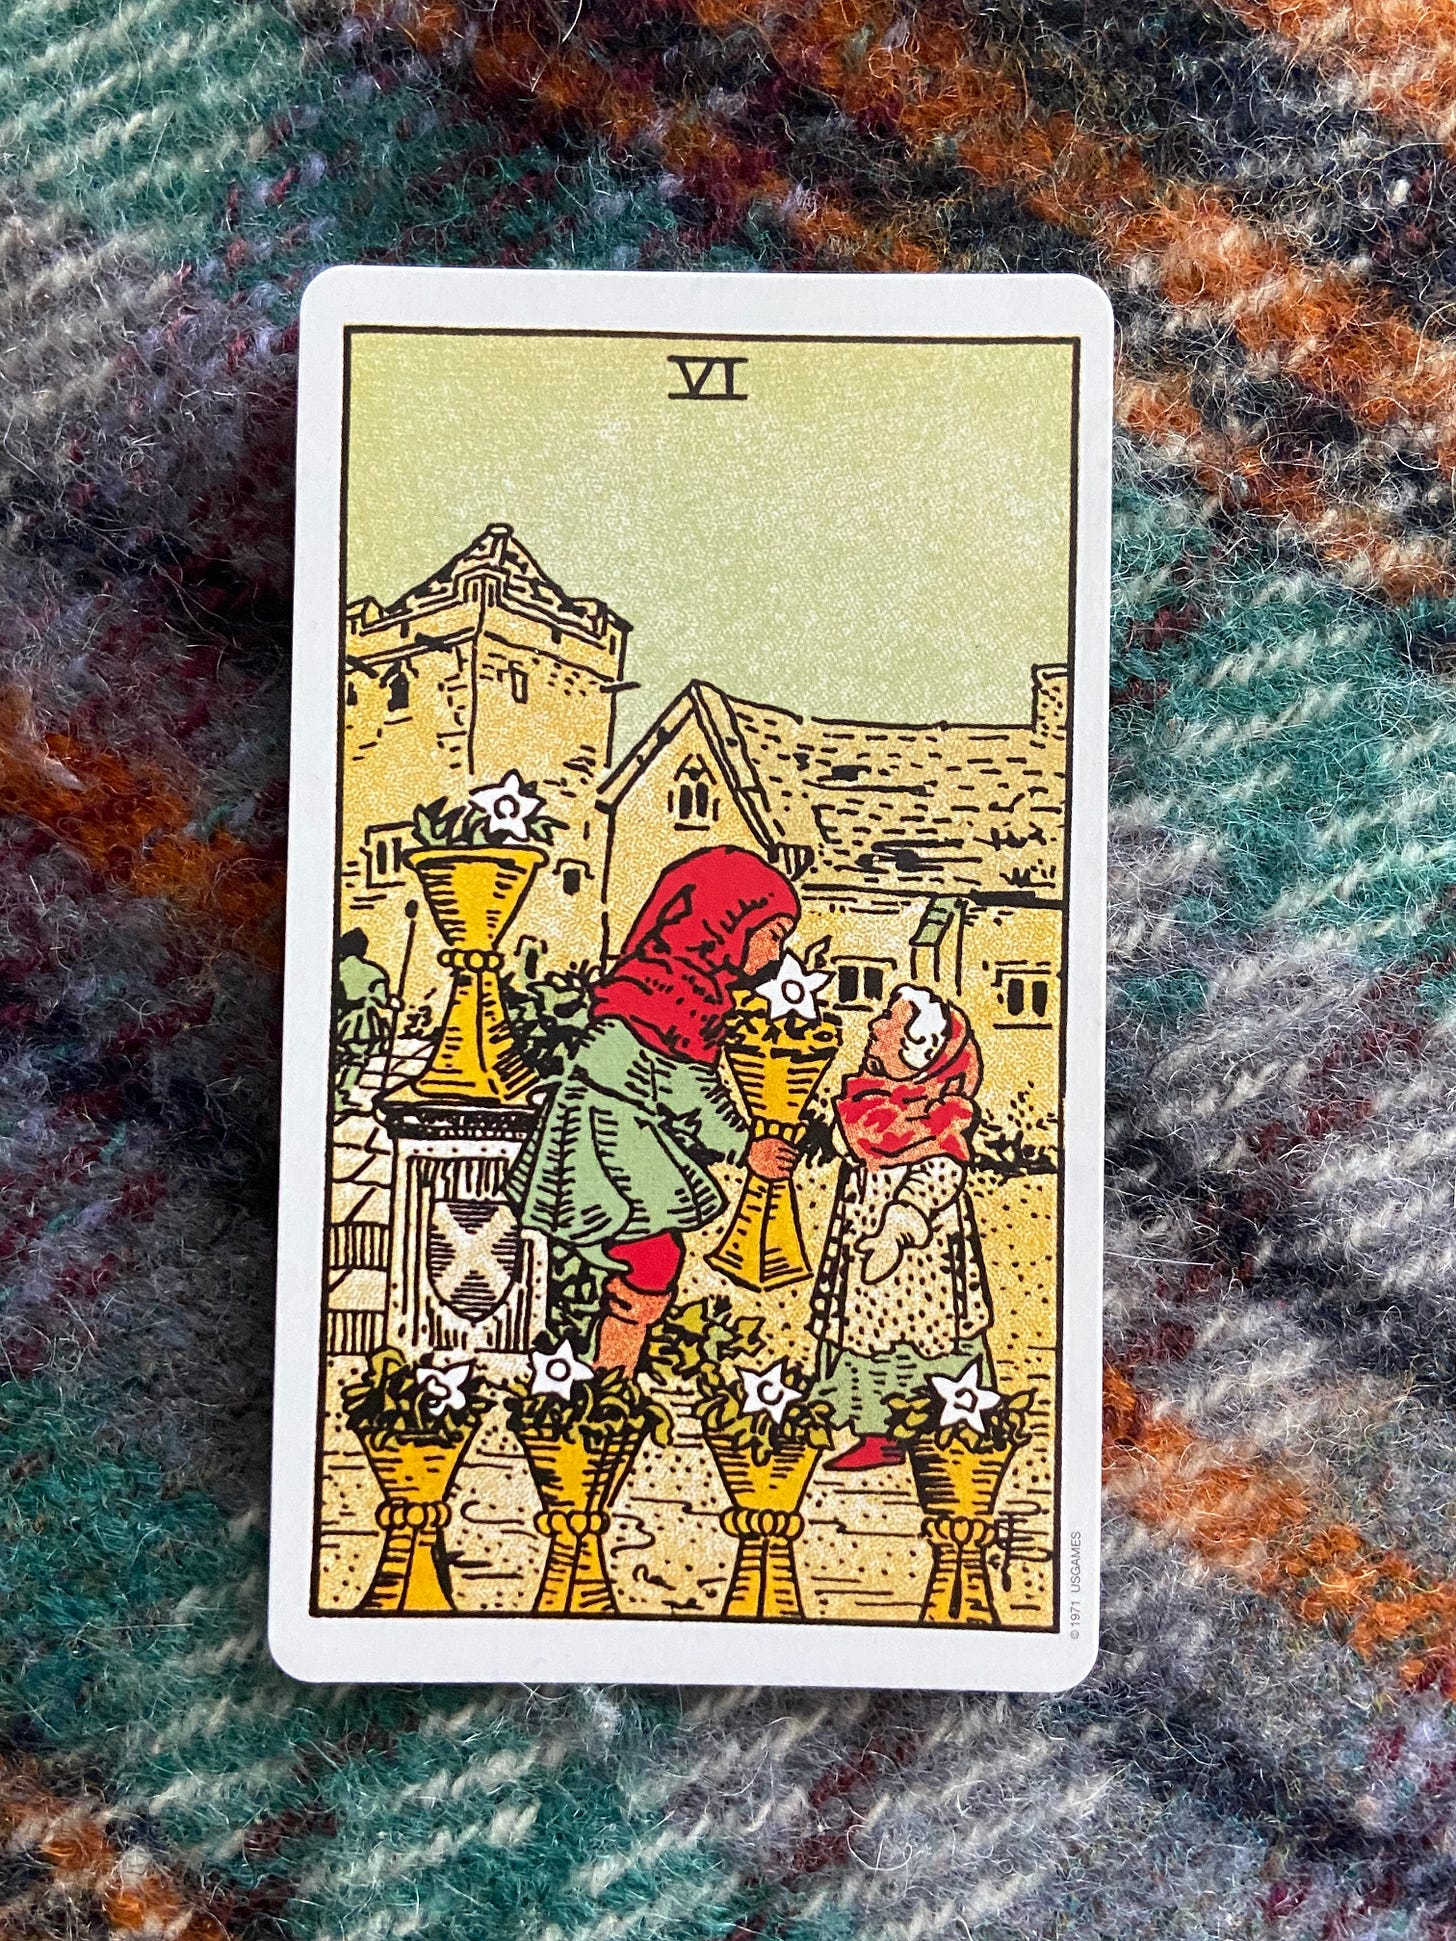 The six of cups tarot card shows a boy in a red hood giving a pot of flowers to a smaller woman, the pair are surrounded by pots of flowers